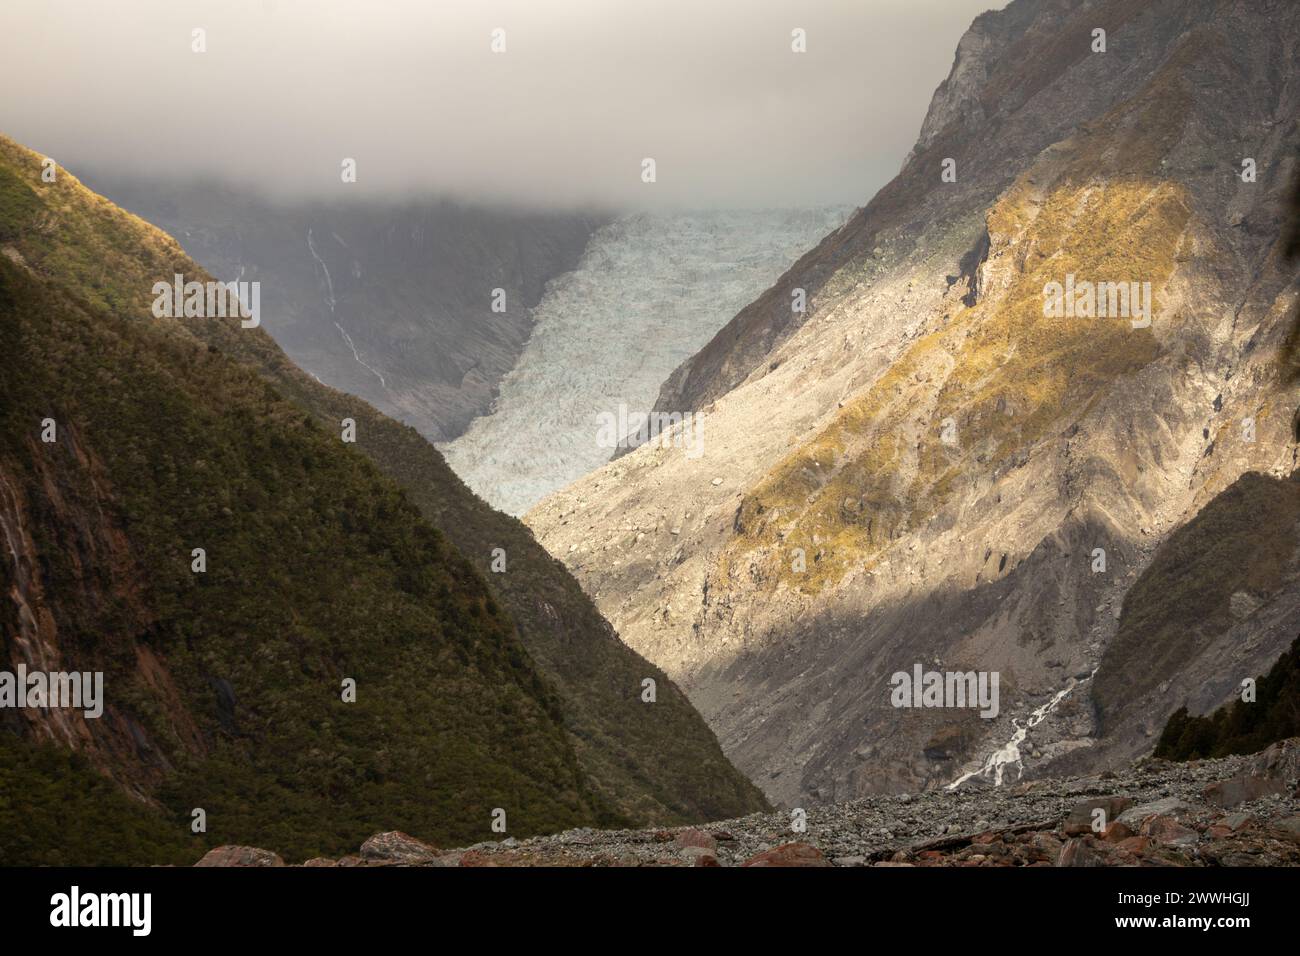 Cloud obscures part of the shrinking Fox glacier on the west coast of the South Island of New Zealand. Stock Photo